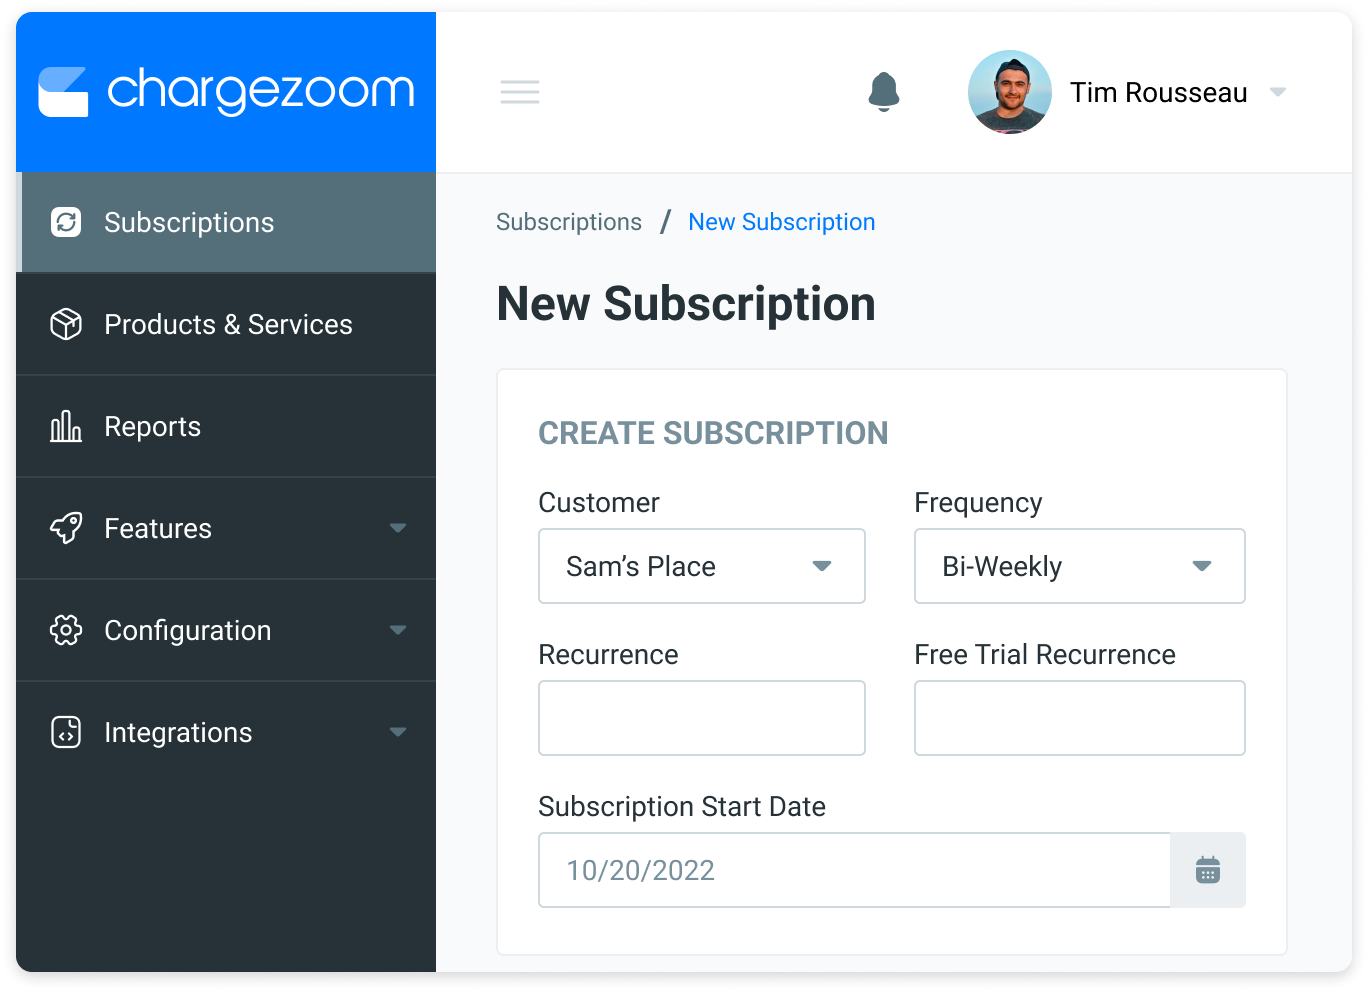 Chargezoom- New Subscription